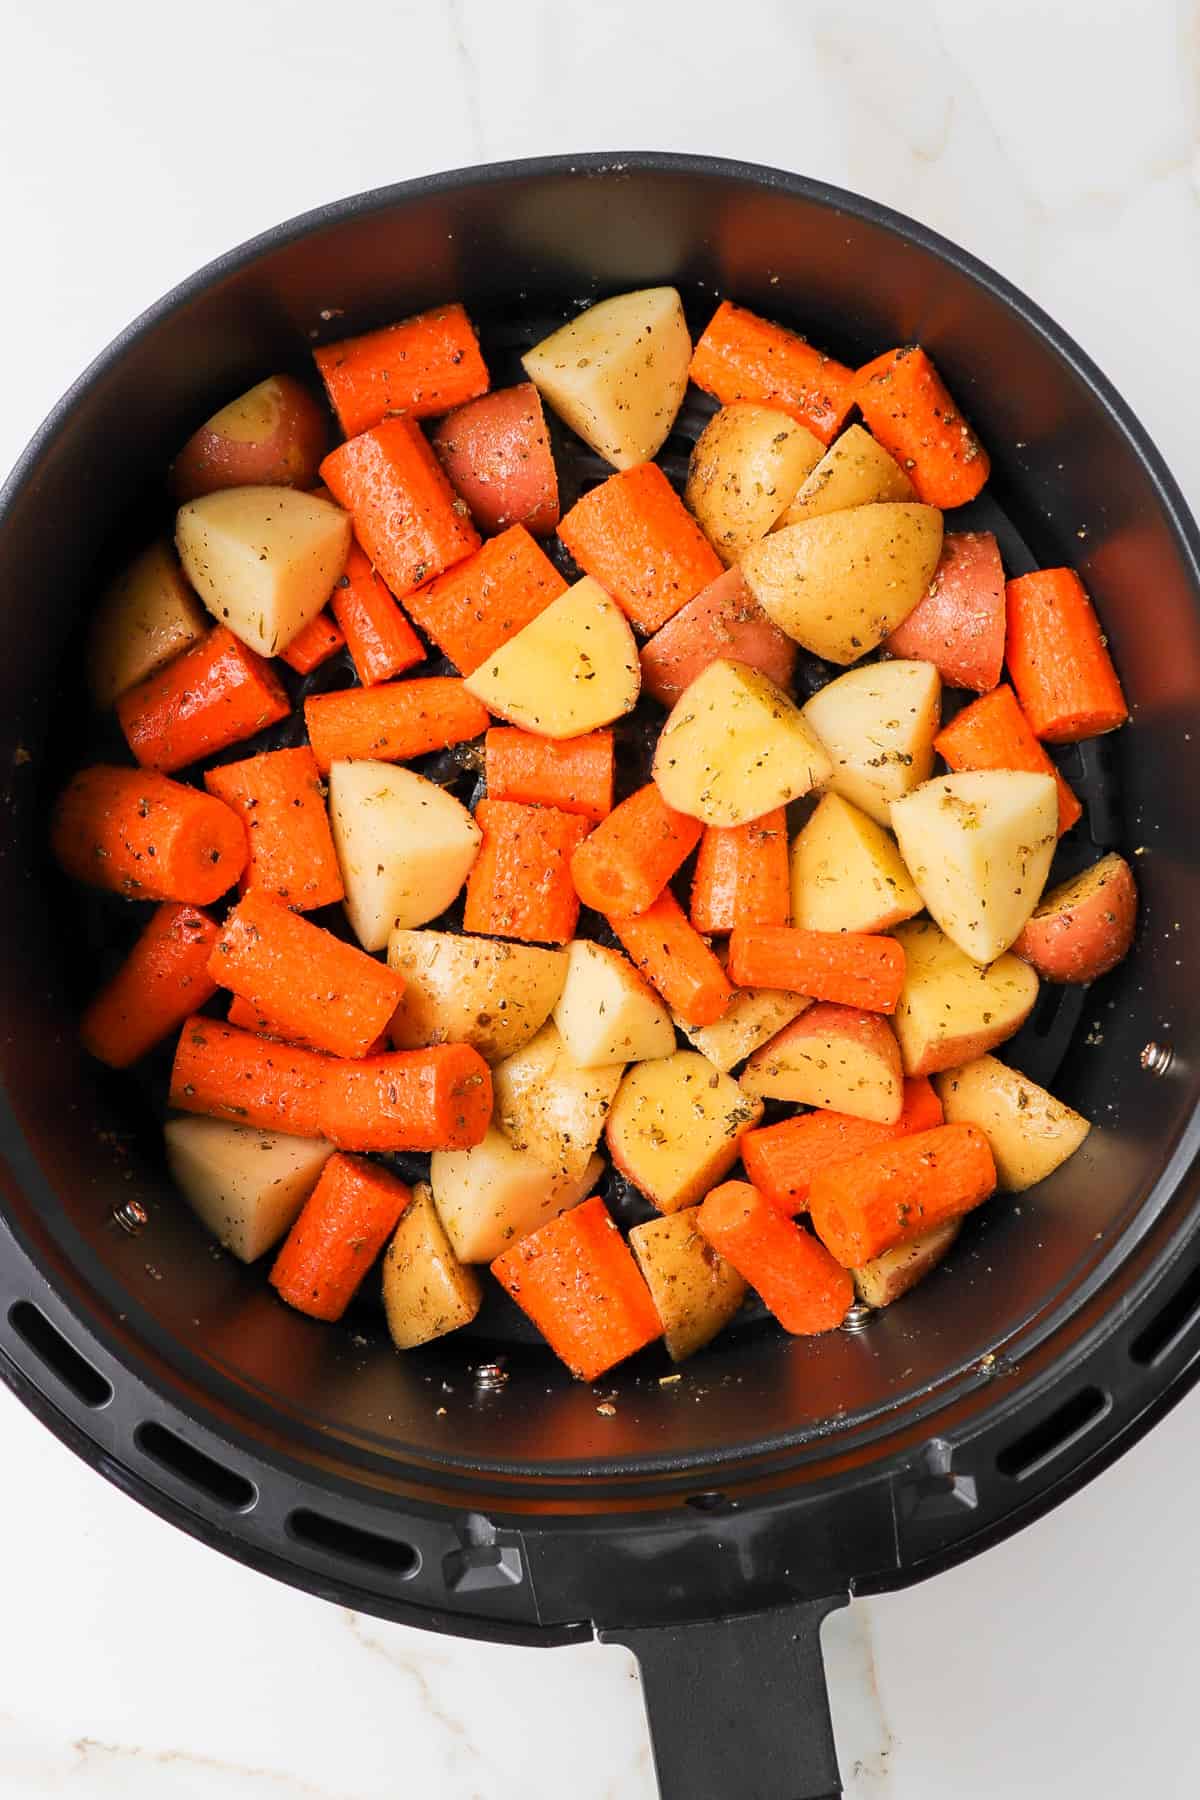 Uncooked carrots and potatoes in air fryer basket.